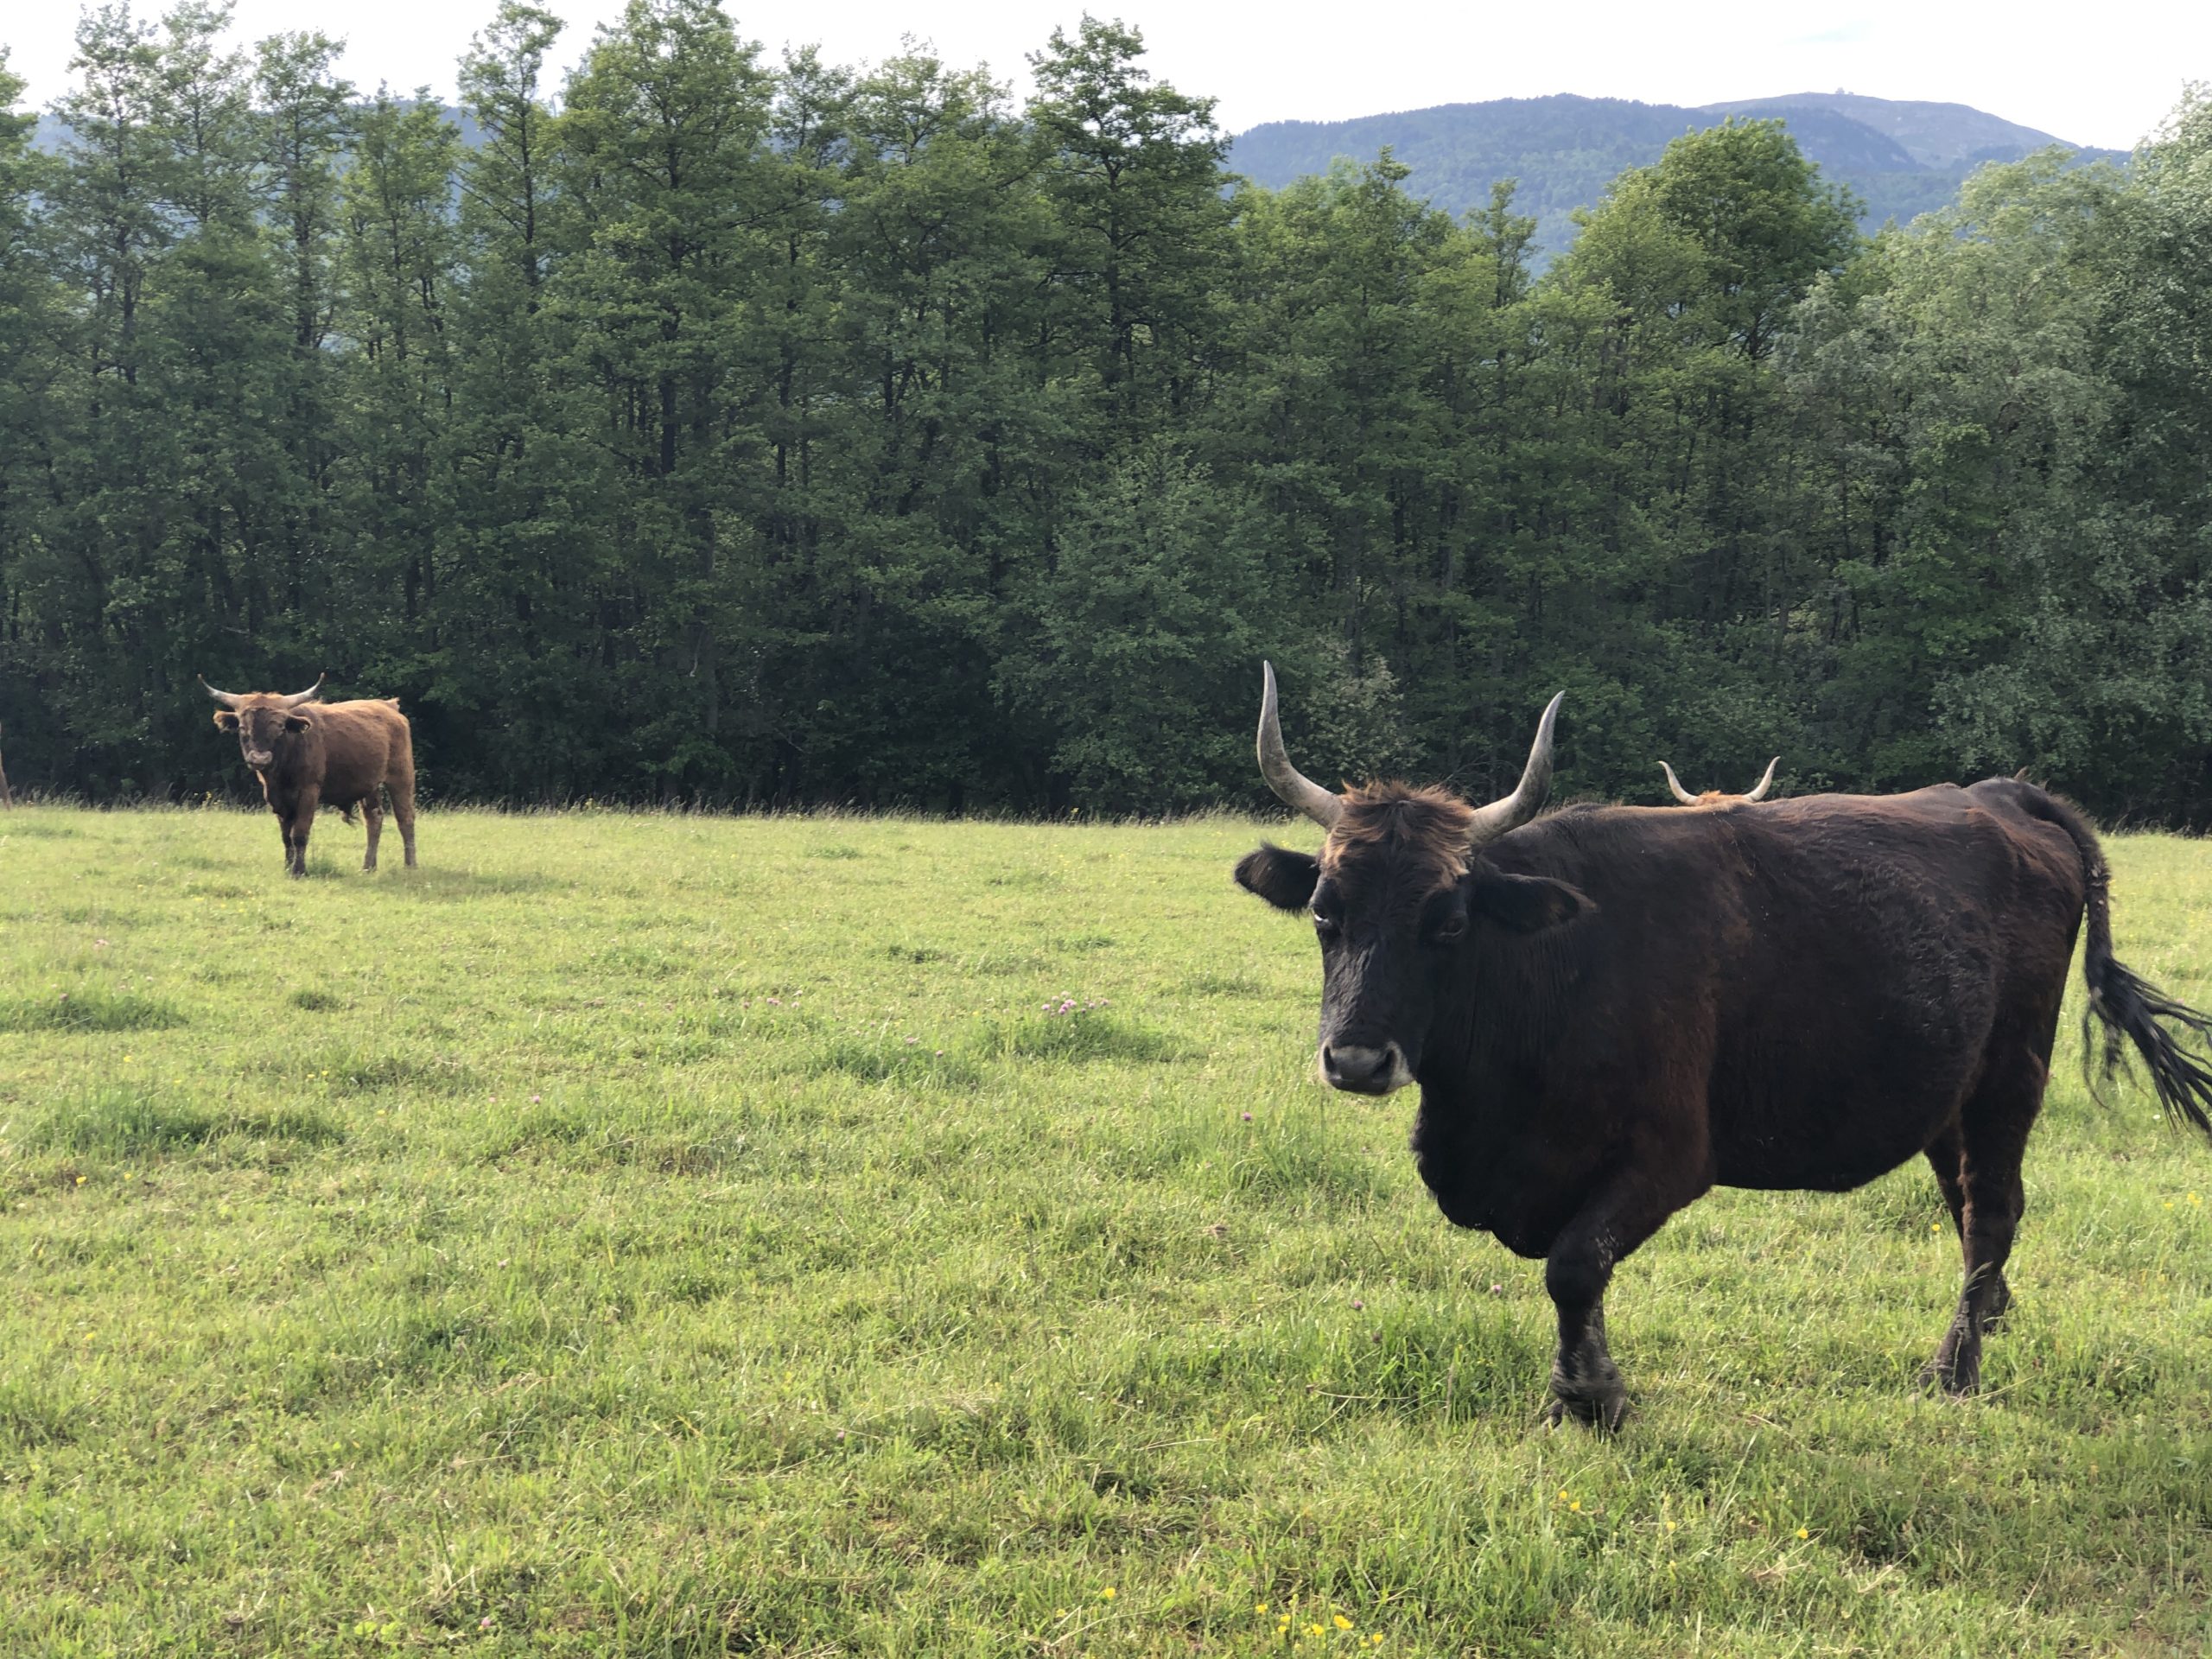 Day 55 Of Self-Isolation in Switzerland – Long Horned Cows